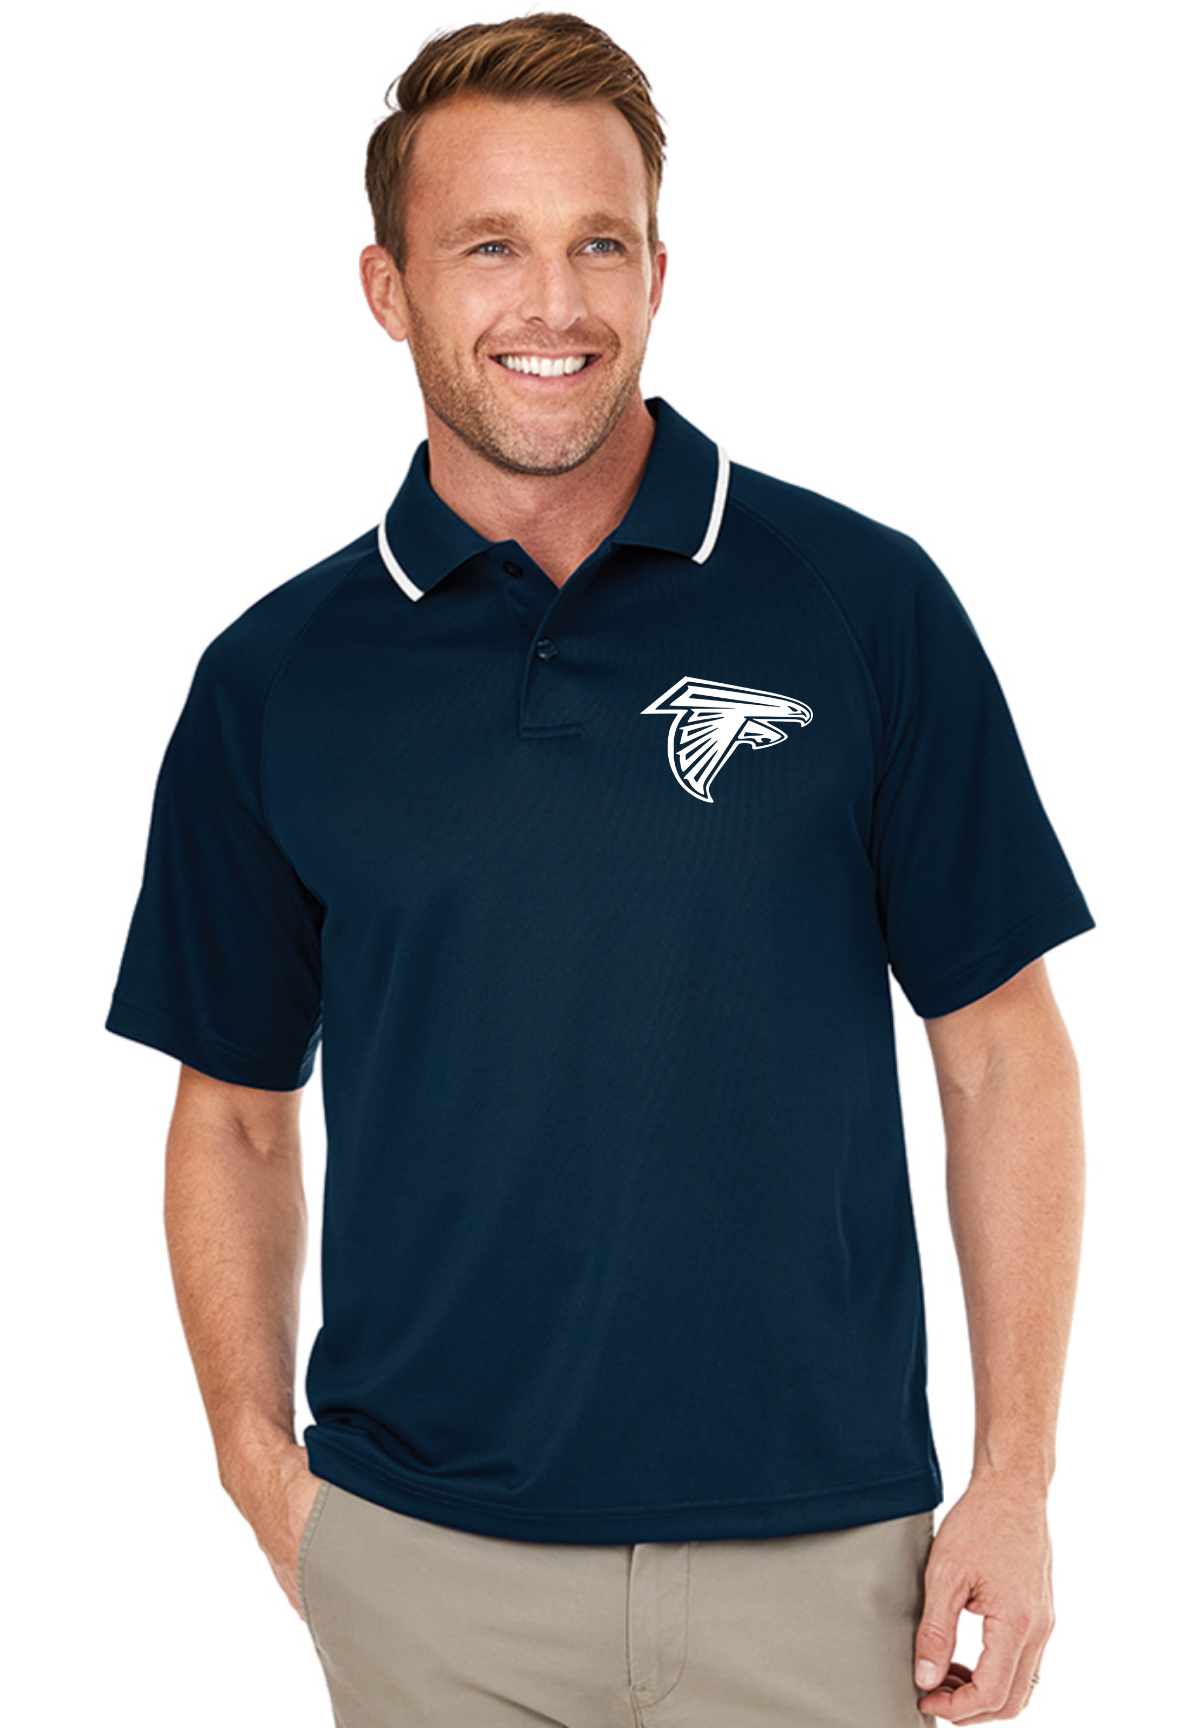 MEN'S CLASSIC SOLID WICKING POLO